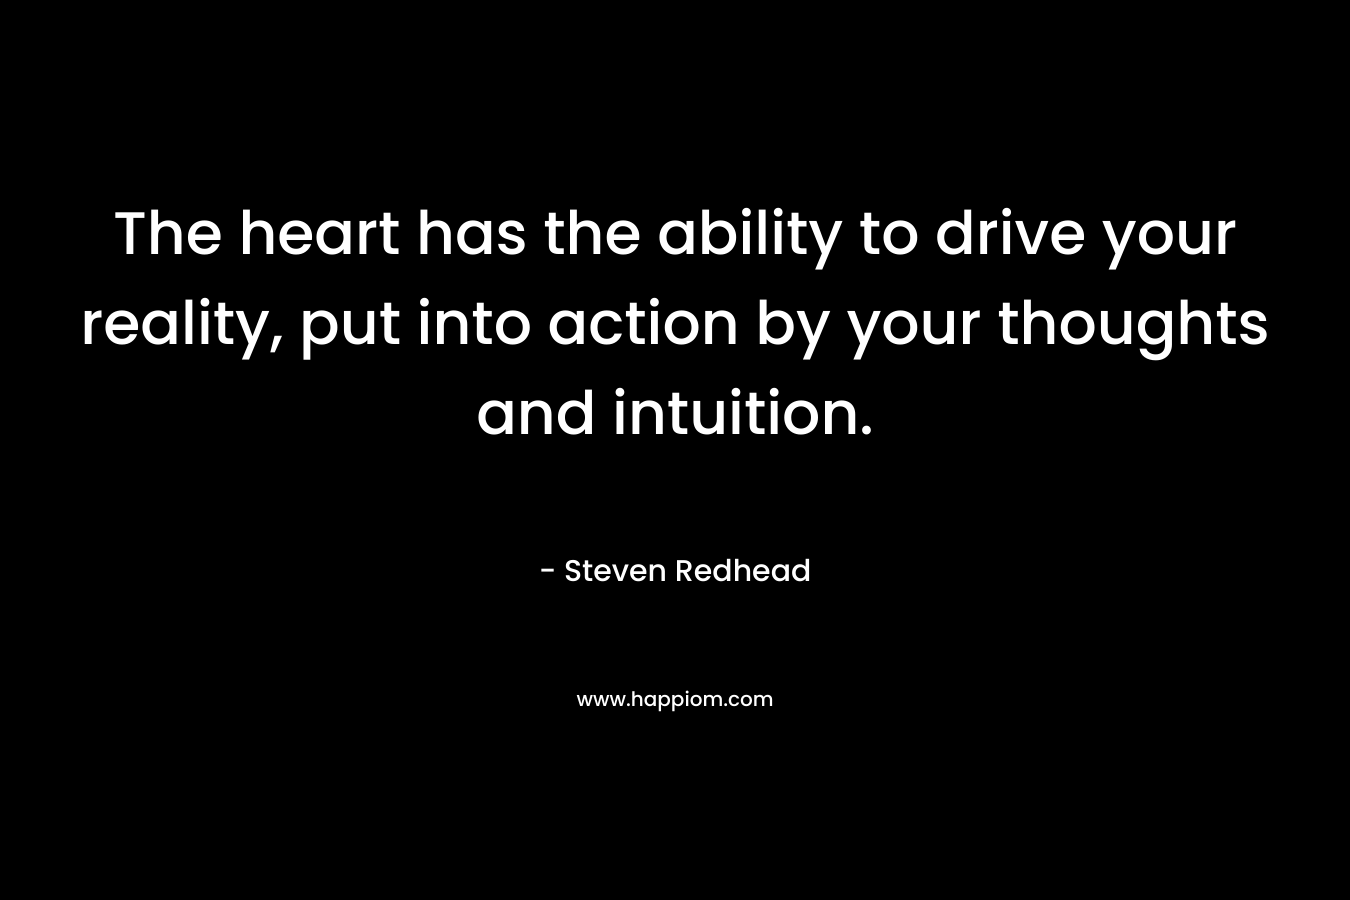 The heart has the ability to drive your reality, put into action by your thoughts and intuition.